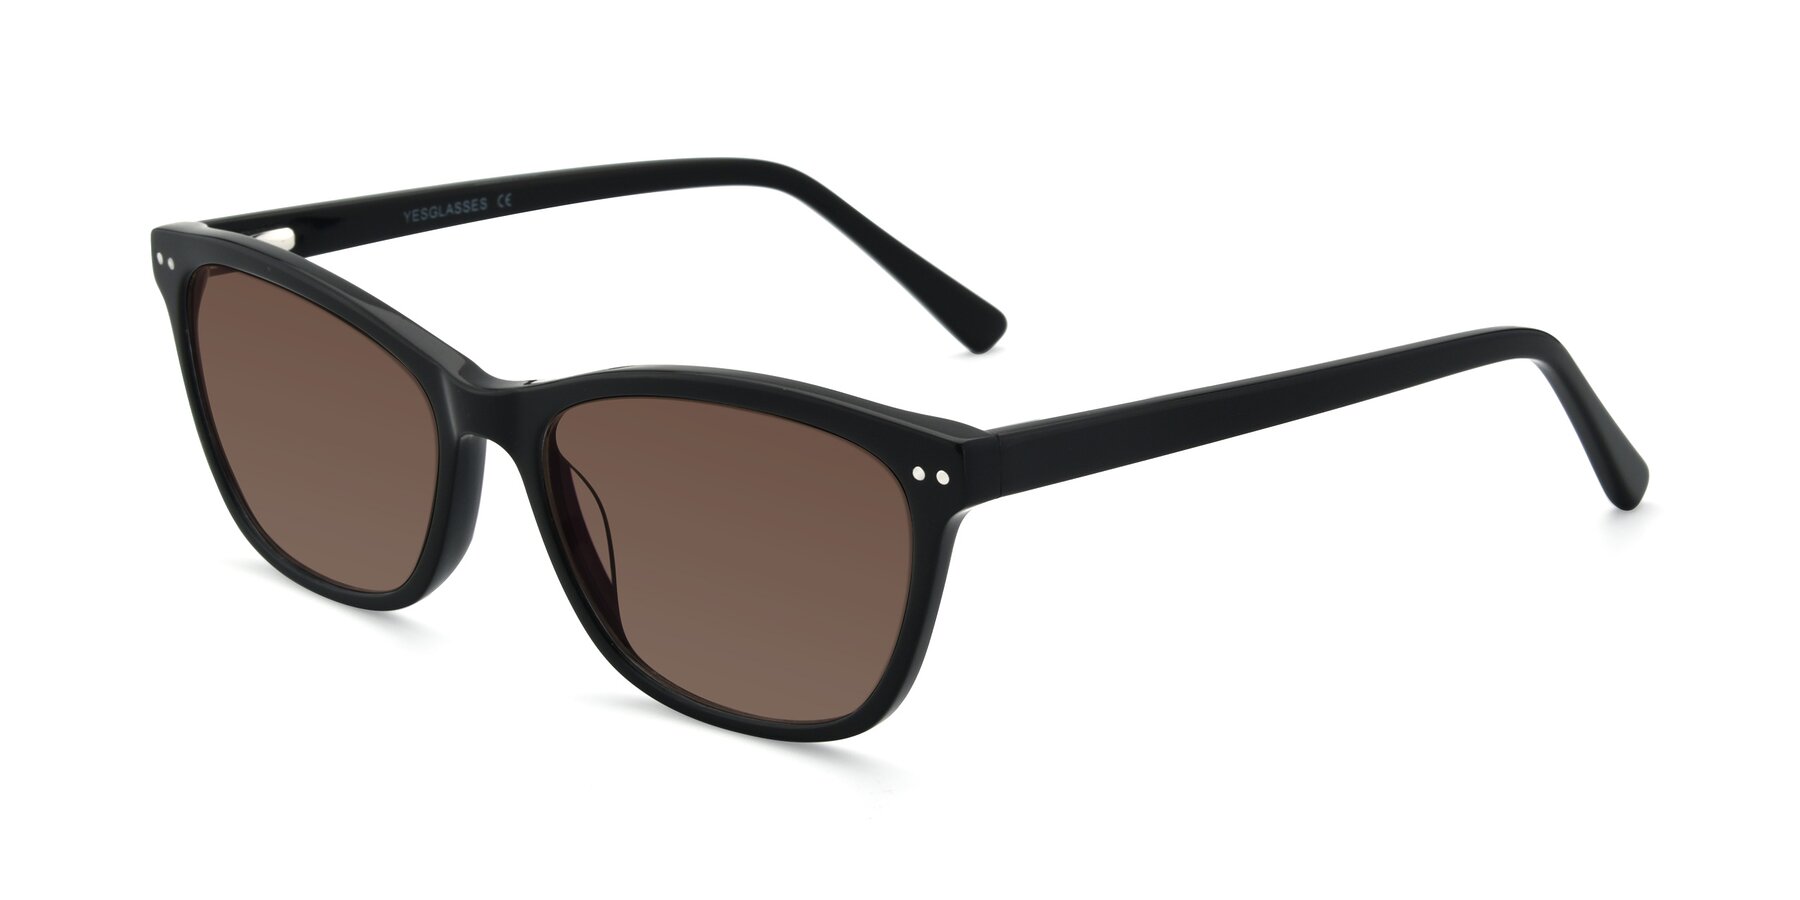 Angle of 17350 in Black with Brown Tinted Lenses